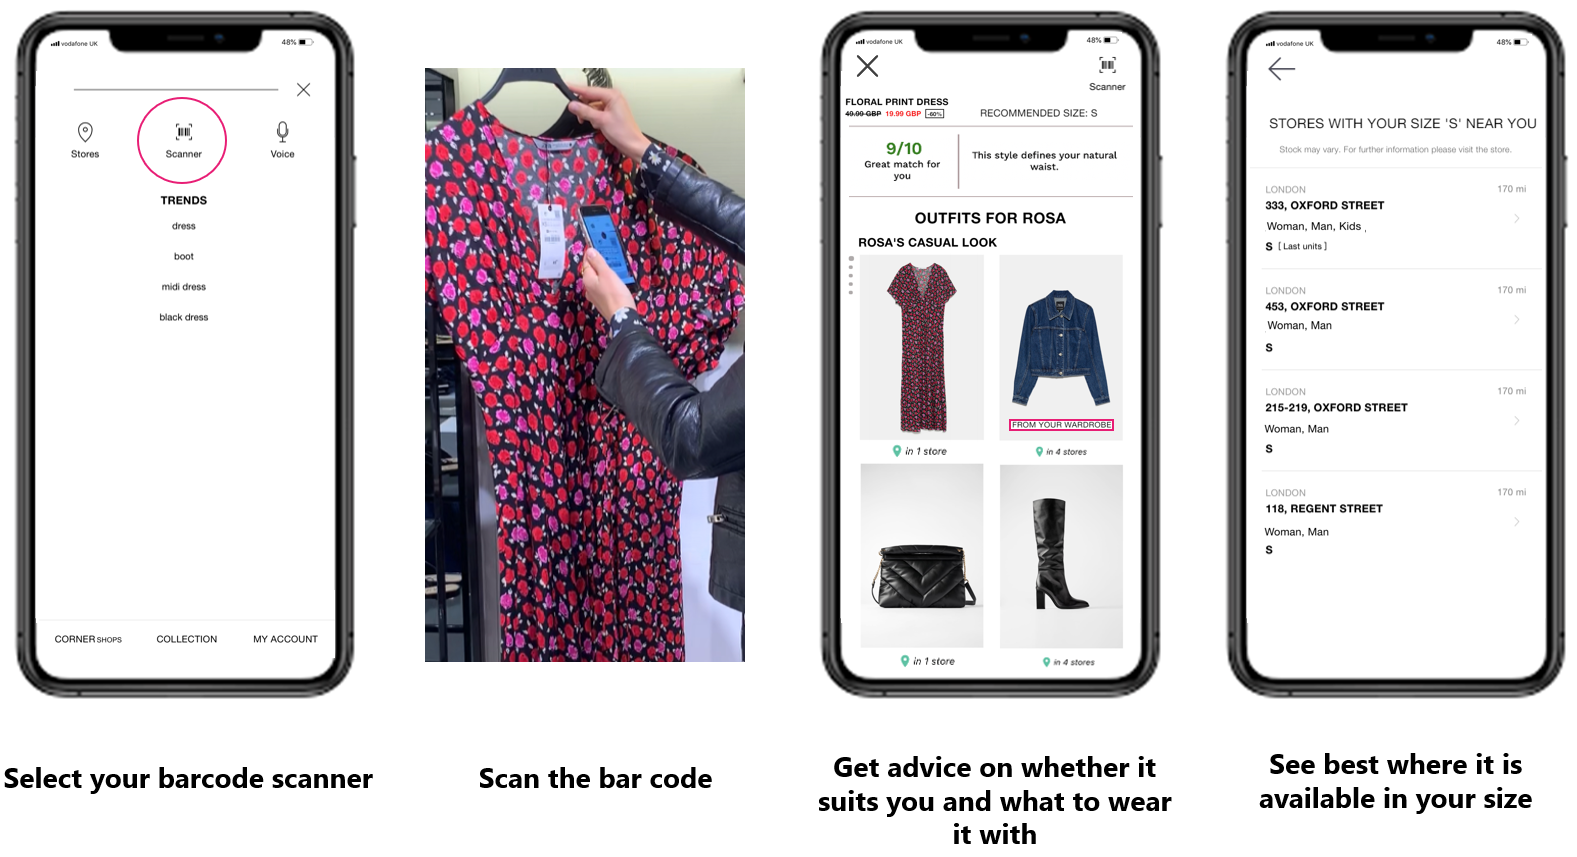 Graphic showing the process of getting style advice and size availability for a product from scanning the bar code in store